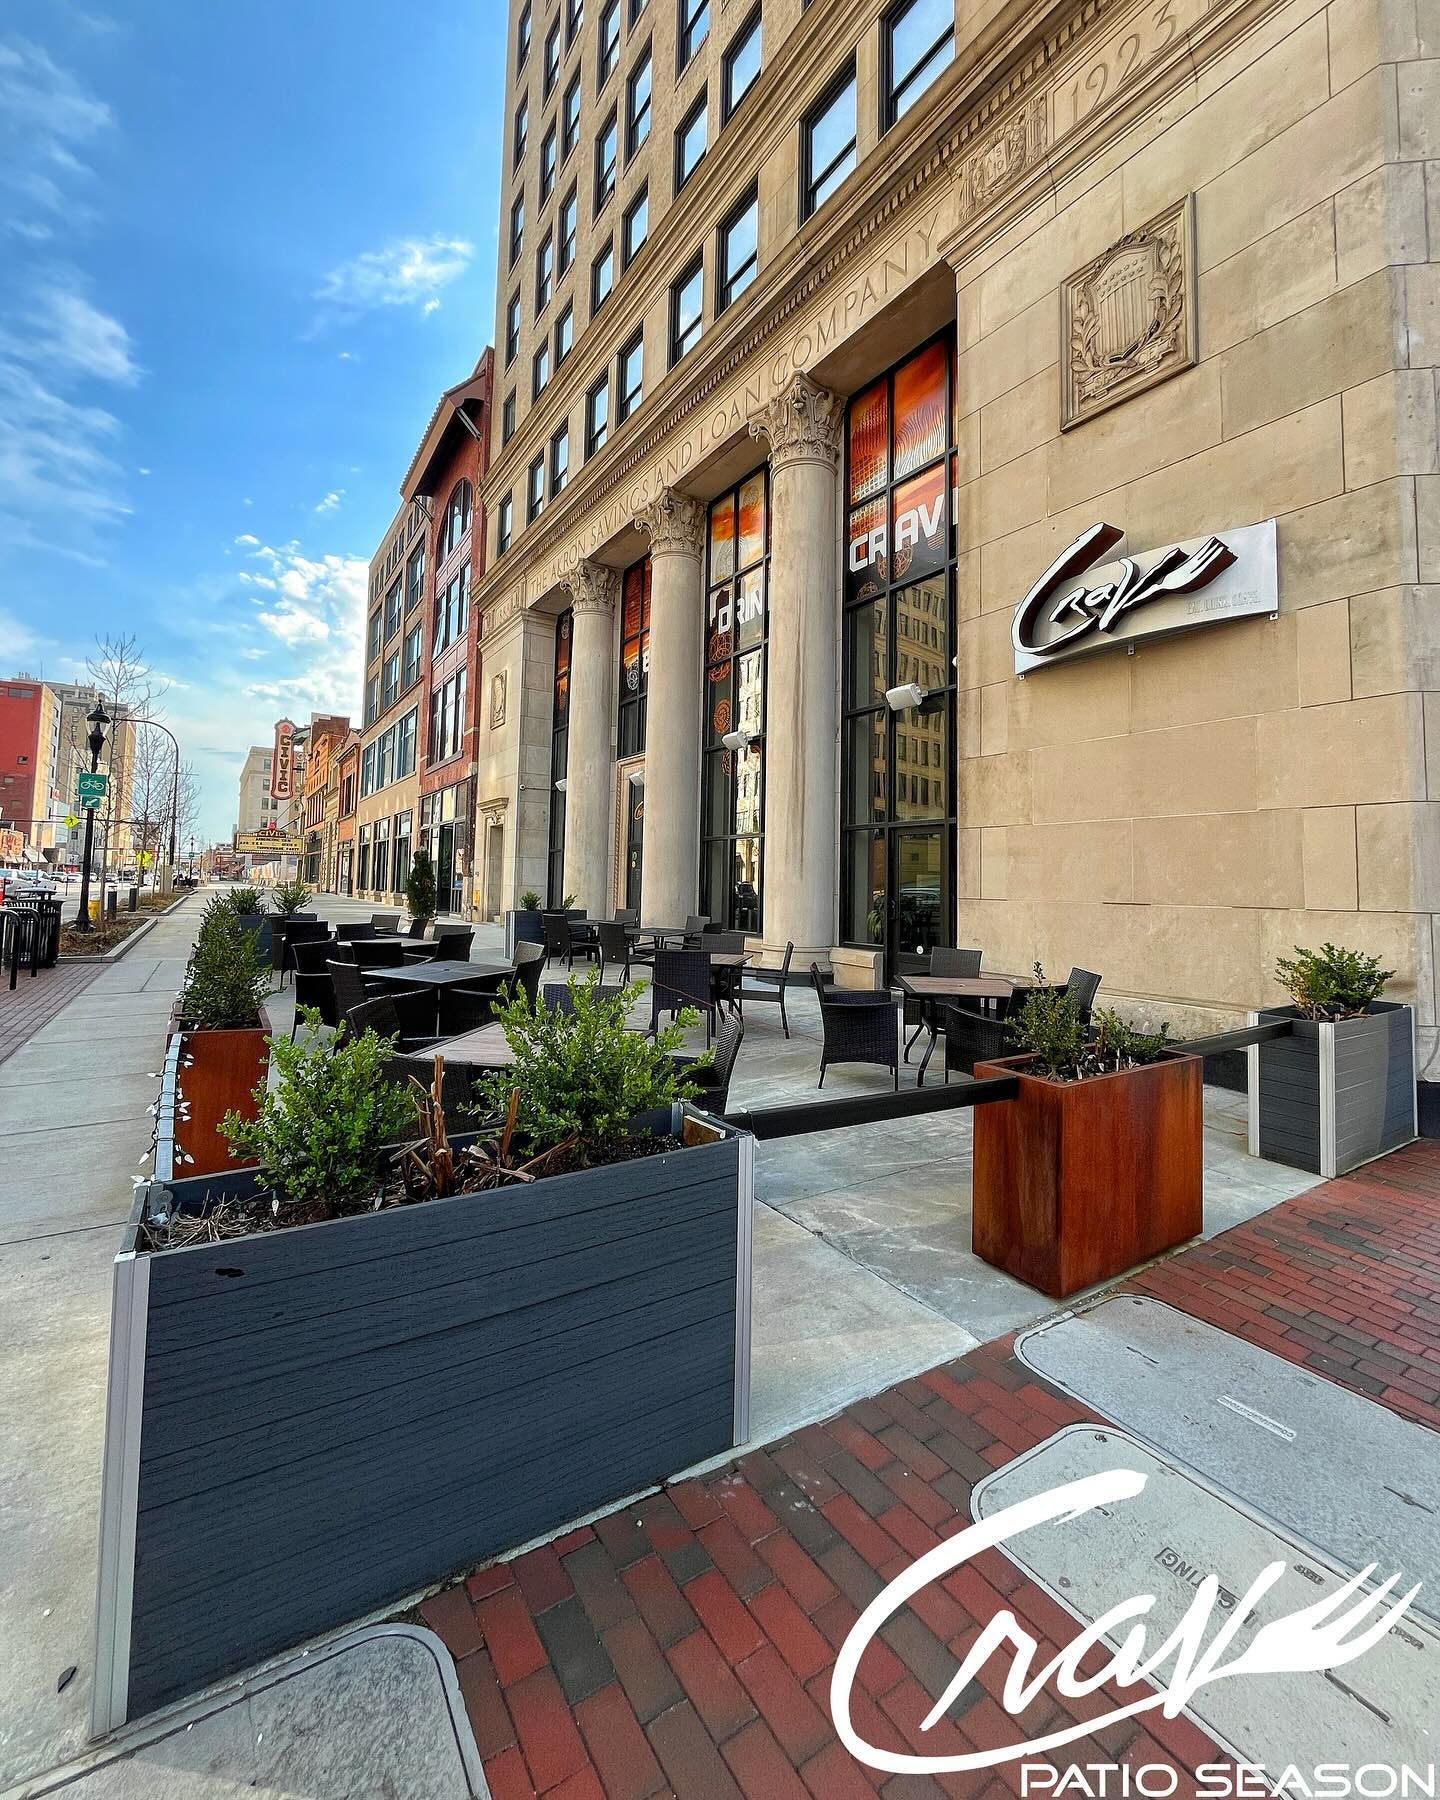 Turn this rainy Tuesday around with dinner at #CraveAkron - As the sun comes out this evening, join us to enjoy delicious dishes in our cozy atmosphere. Embrace the warmth of good food and good company at Crave tonight until 10!🥗🏛️🥘
&bull;&bull;&b